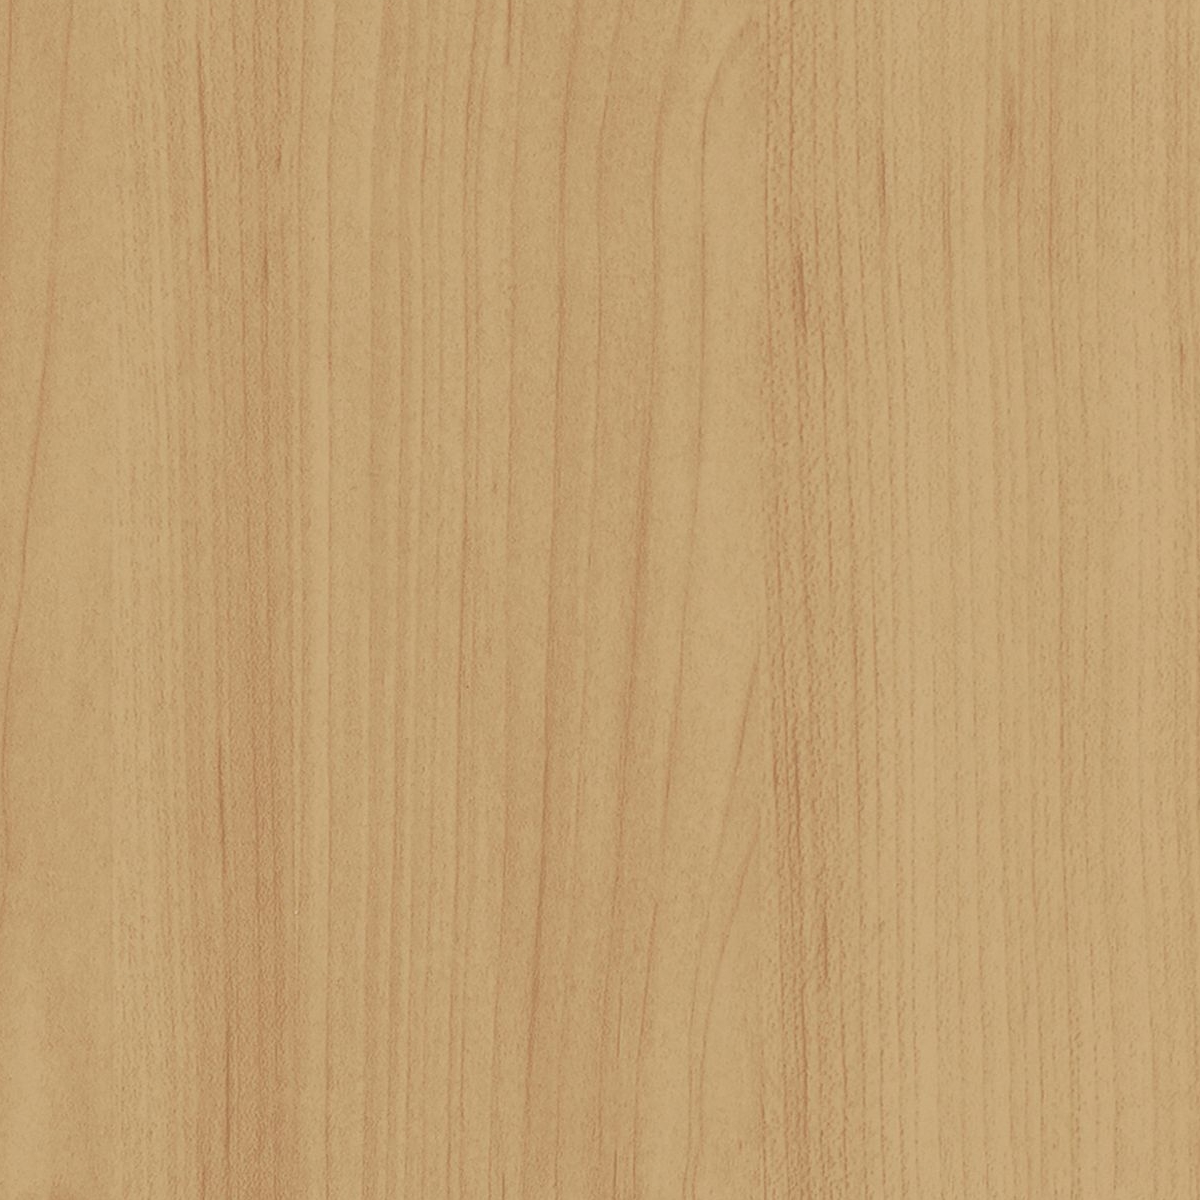 B3 Natural Maple